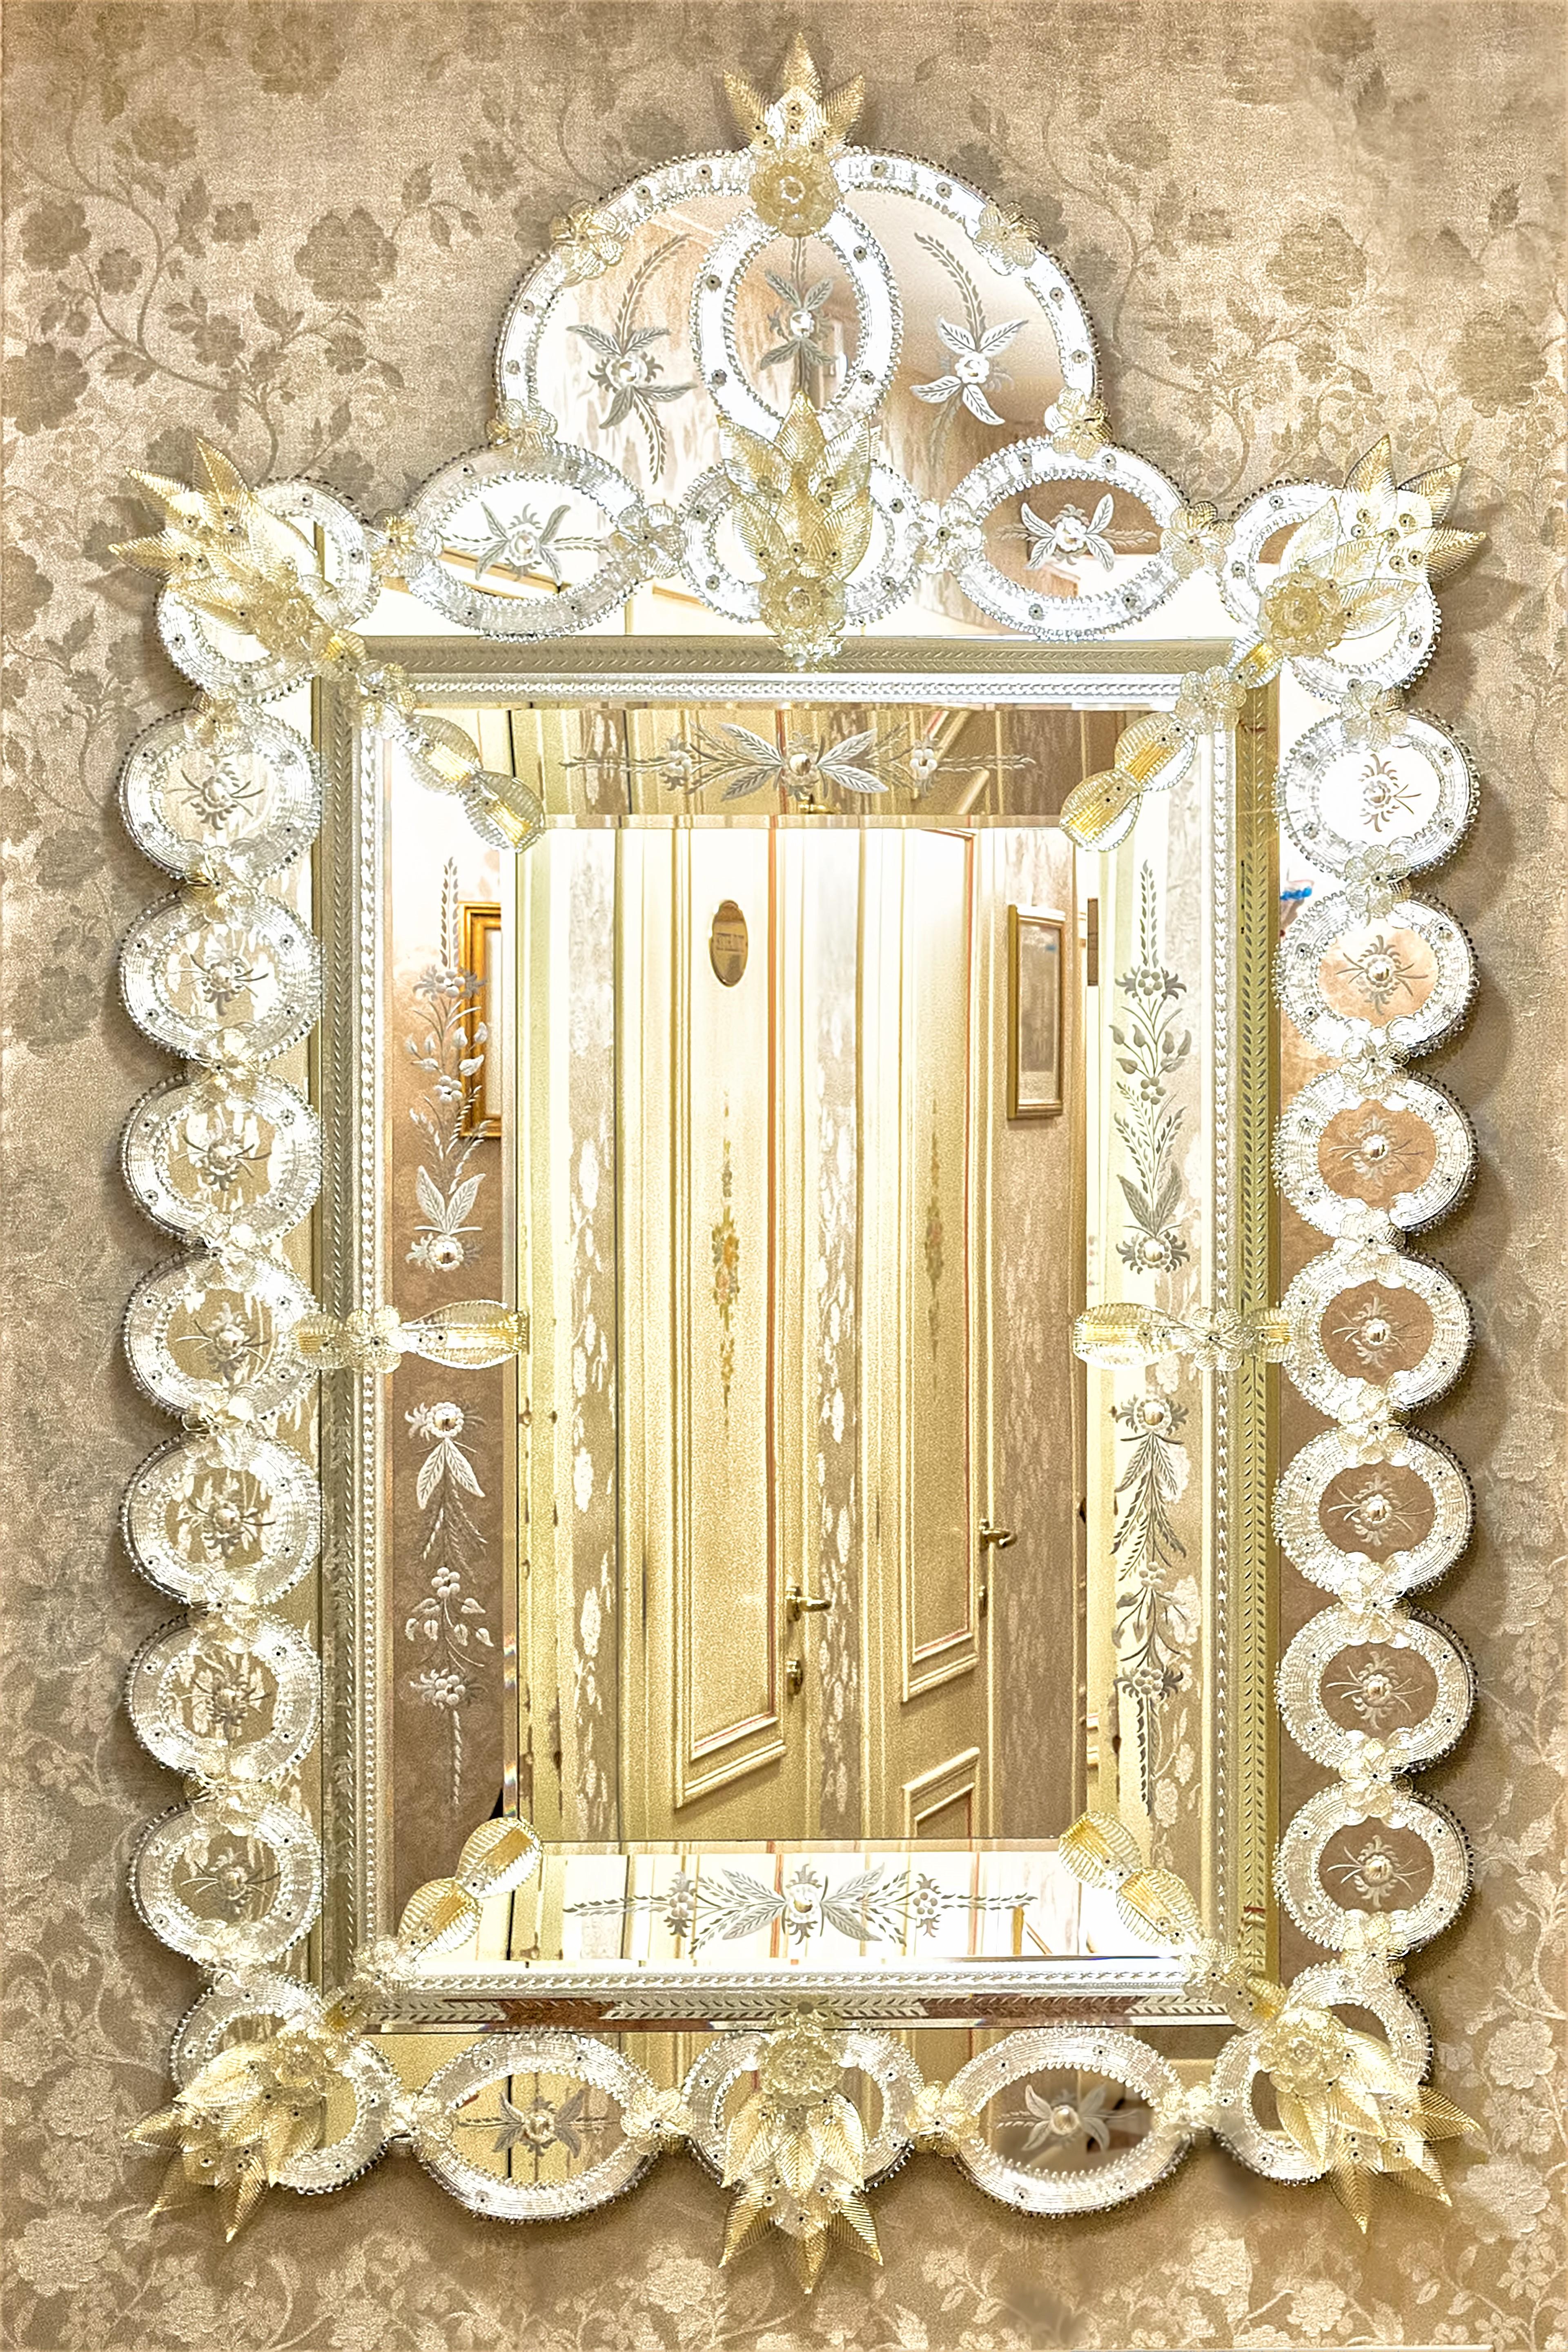 Luxurius Murano glass mirror in Venetian style, produced by Fratelli Tosi in the island of Murano in silver color with gold flower and leaves finishing, engraved, beveled and worked entirely by hand according to the Murano tradition, .
A Luxurious